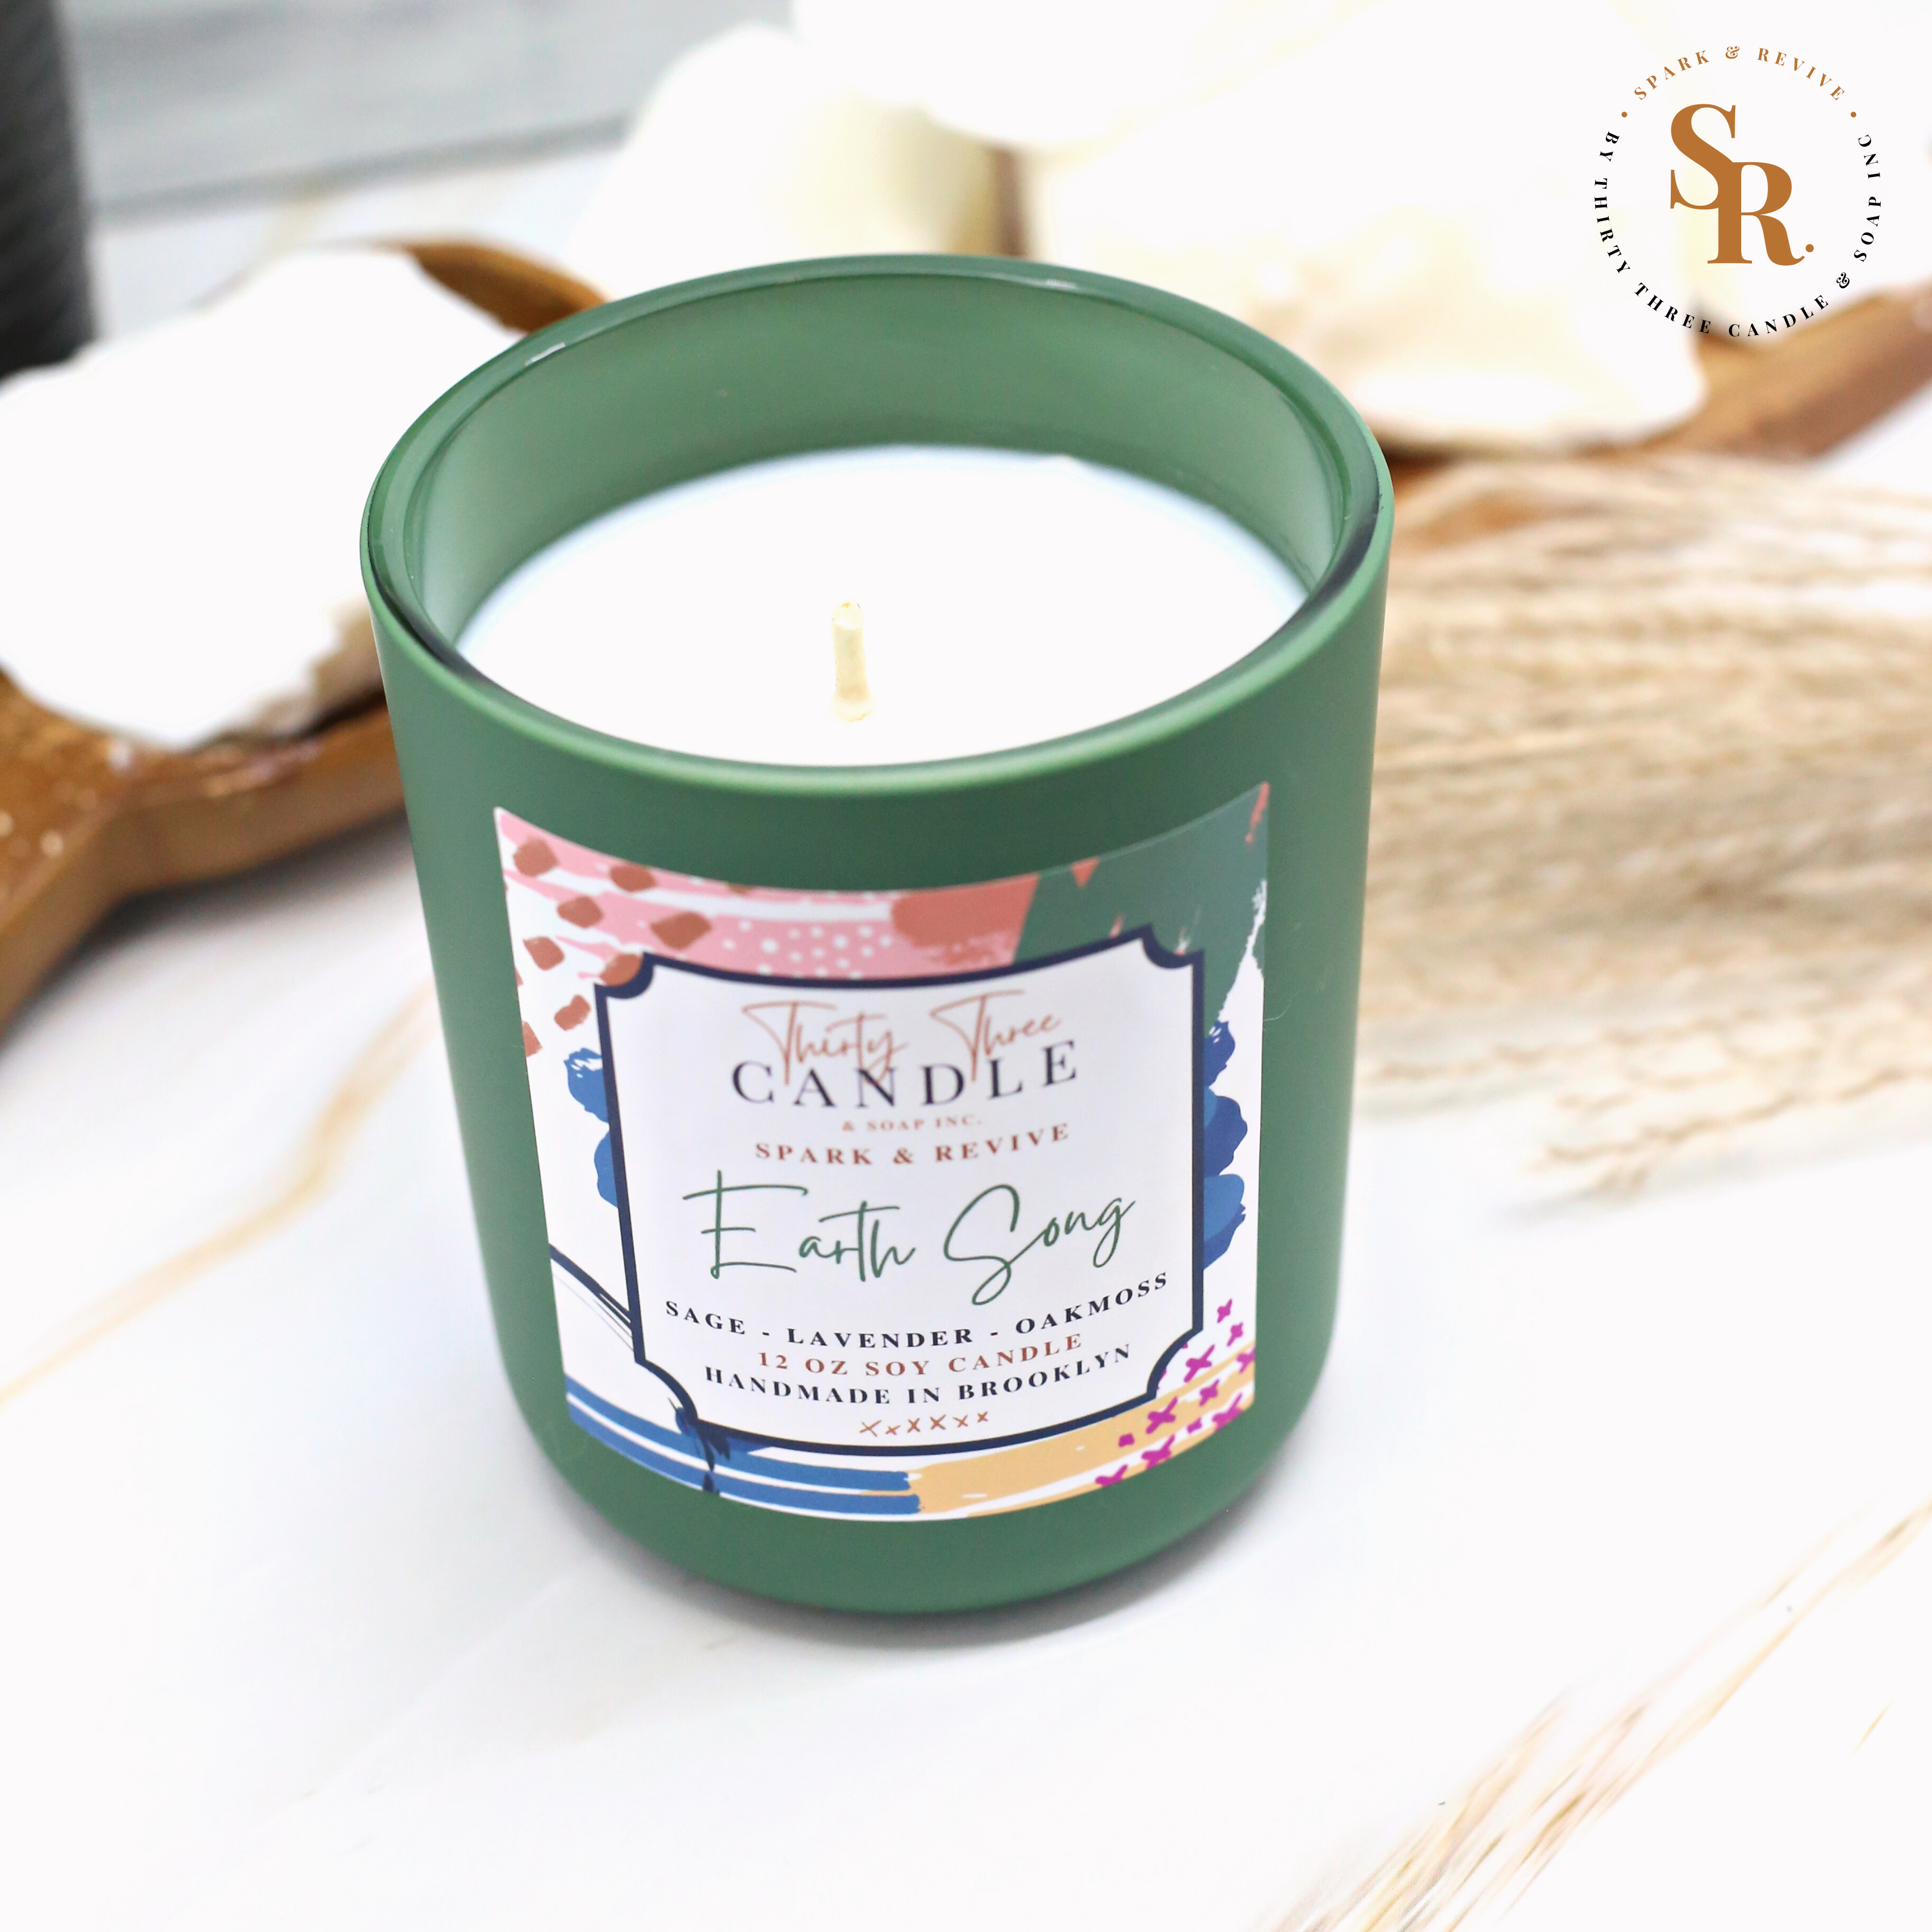 Looking to ground yourself and create an atmosphere soaked in intrigue?  Earth Song is a clean, sophisticated scented soy candle with universal appeal. This captivating fragrance sends you on an earth daydream with hints of orange, grapefruit, and an infusion of sage. Lavender, oakmoss, amber, and tonka round out the middle and base to bring a beautifully refined and irresistible essence to your space.  Earth Song is infused with natural essential oils, including sage, lavandin, and orange. @SparkandRevive